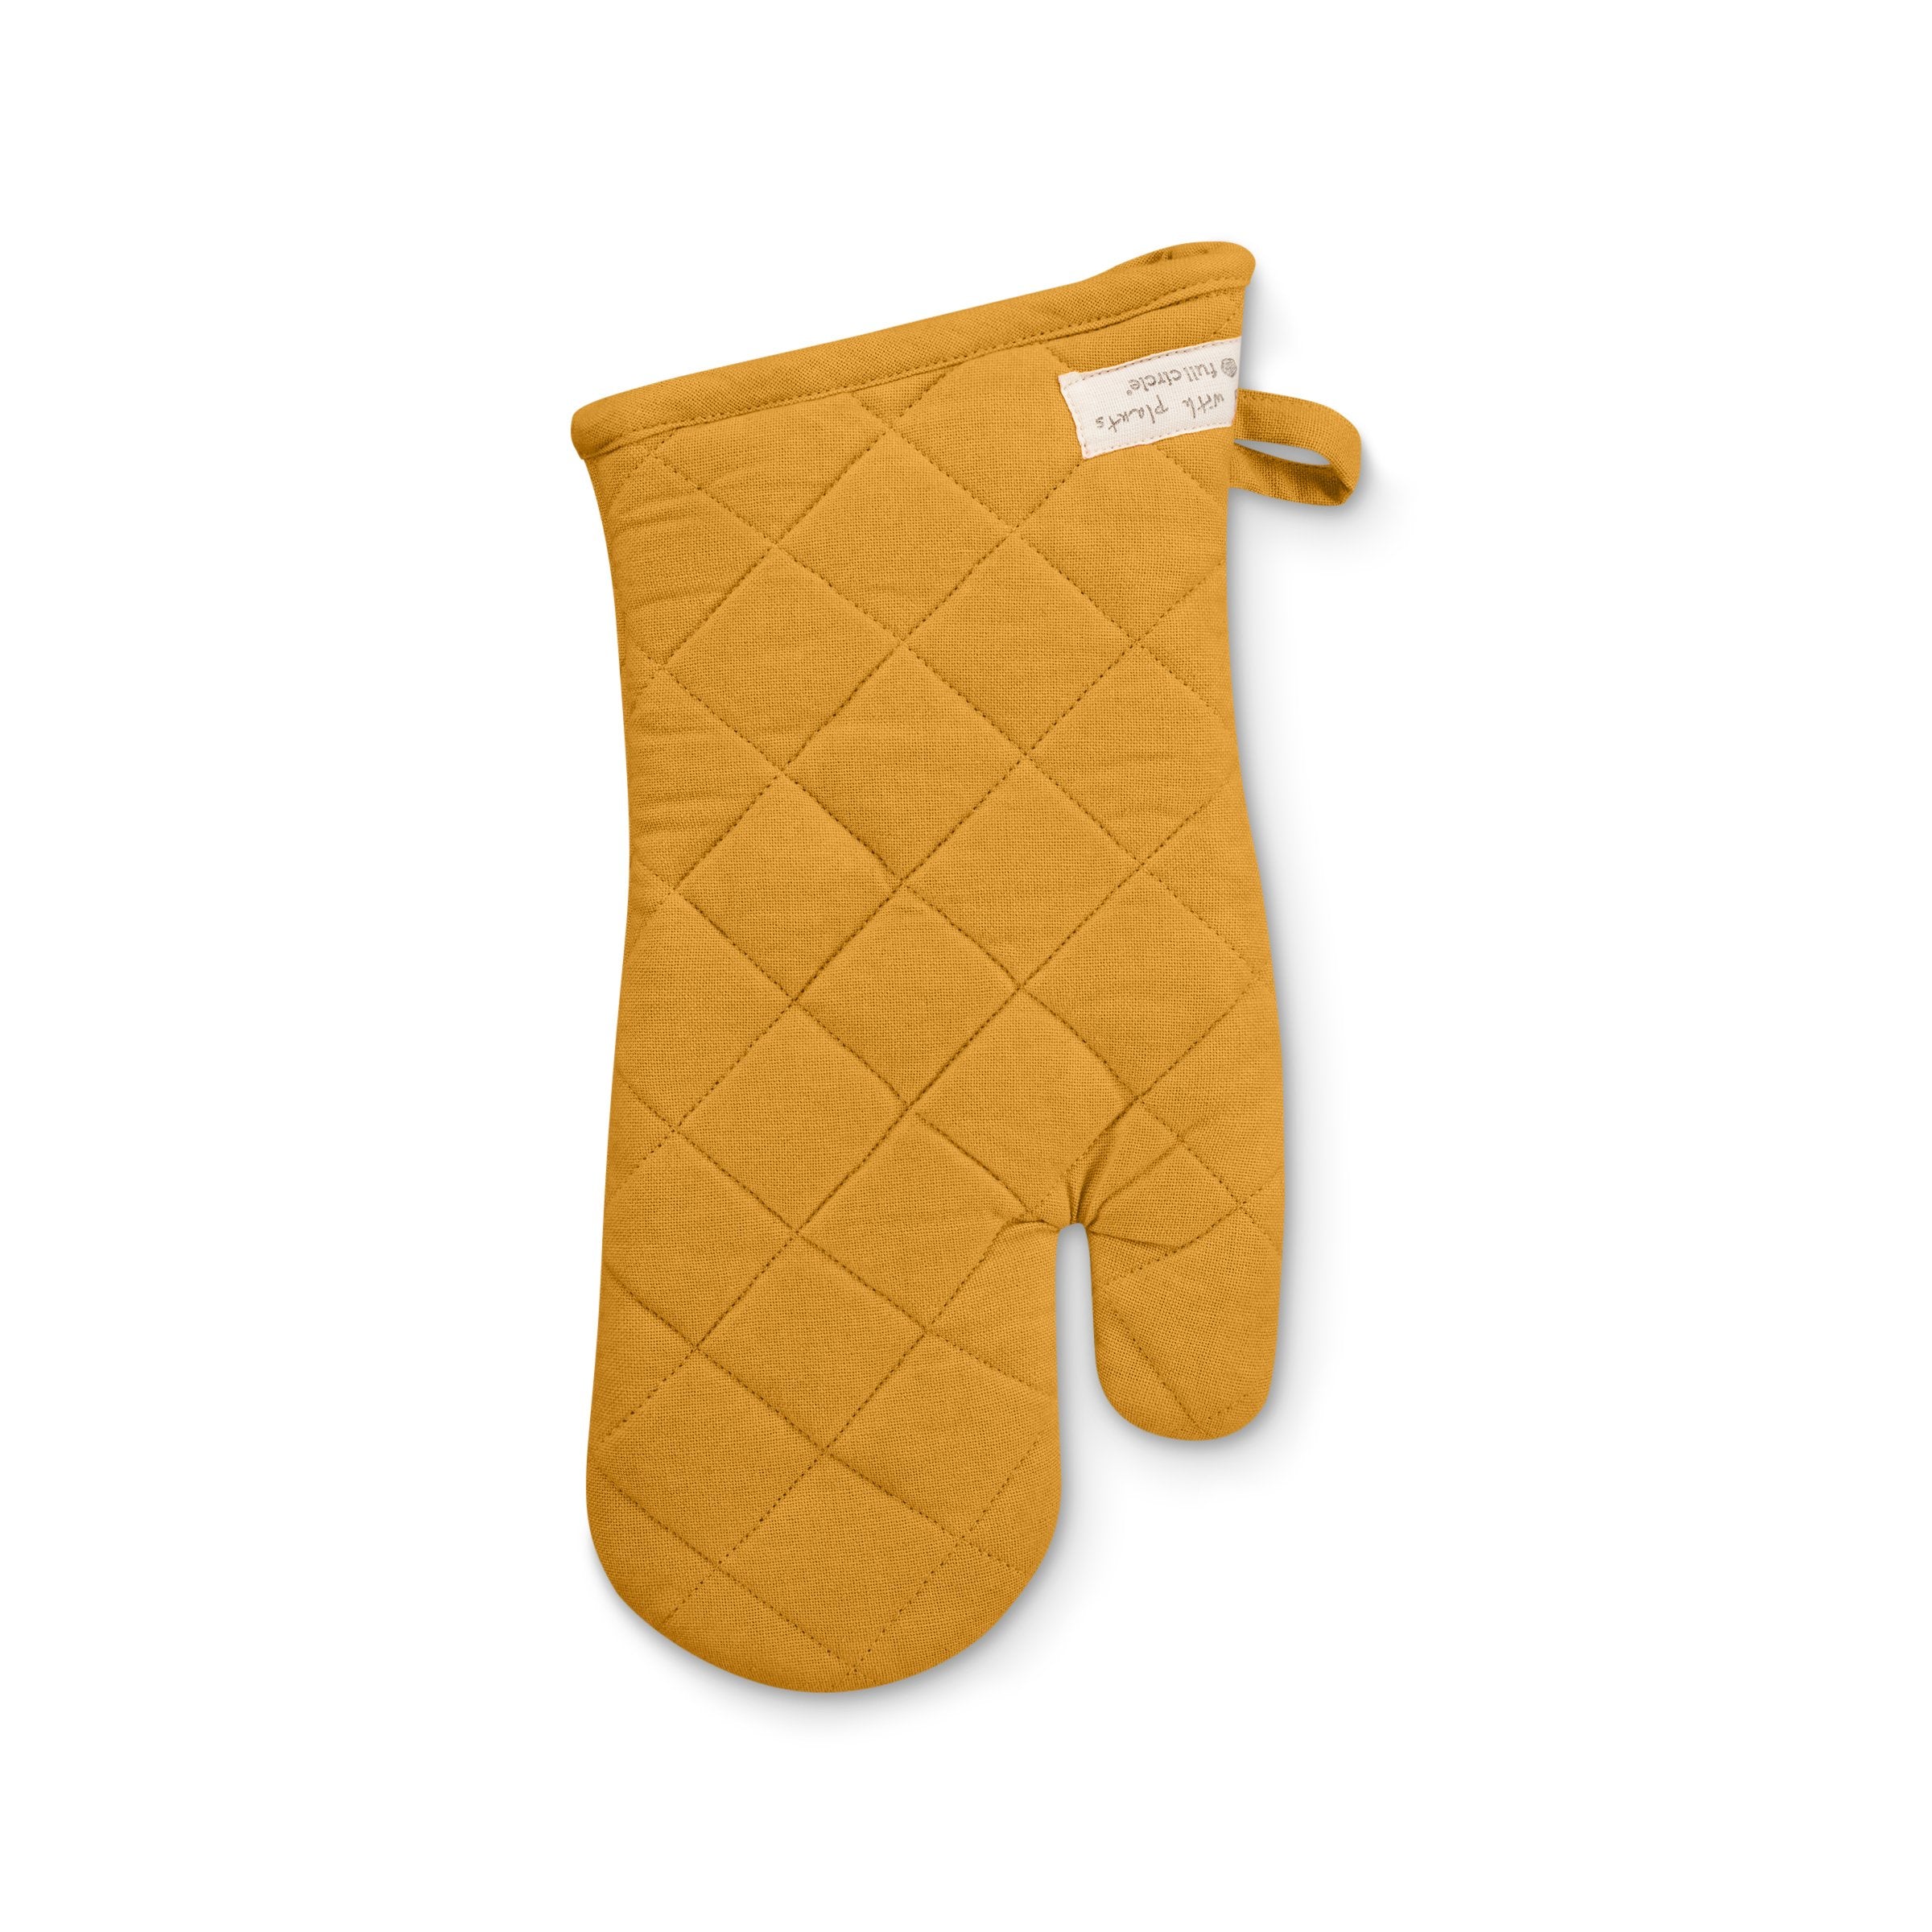 Oven Mitt, 1 each at Whole Foods Market